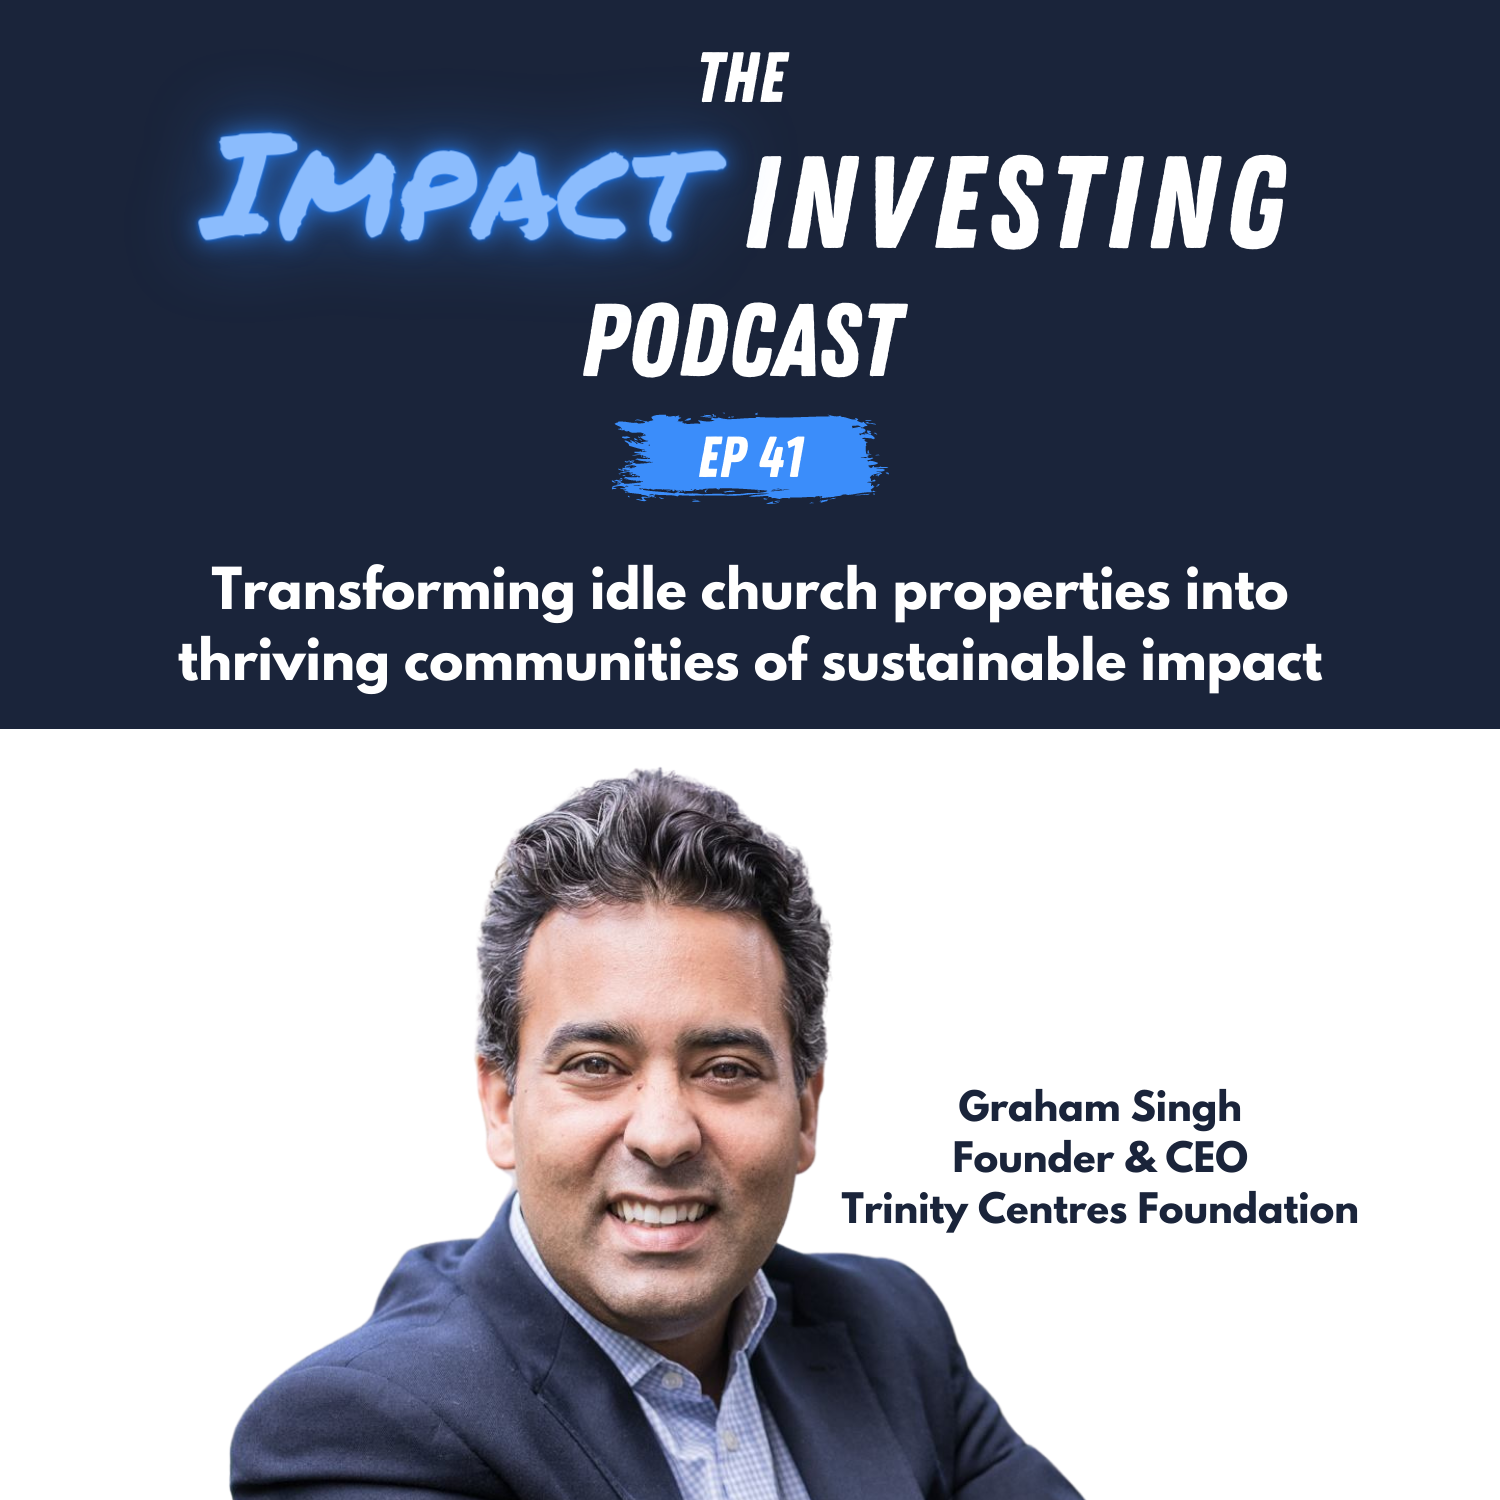 41 - Transforming idle church properties into thriving communities of sustainable impact